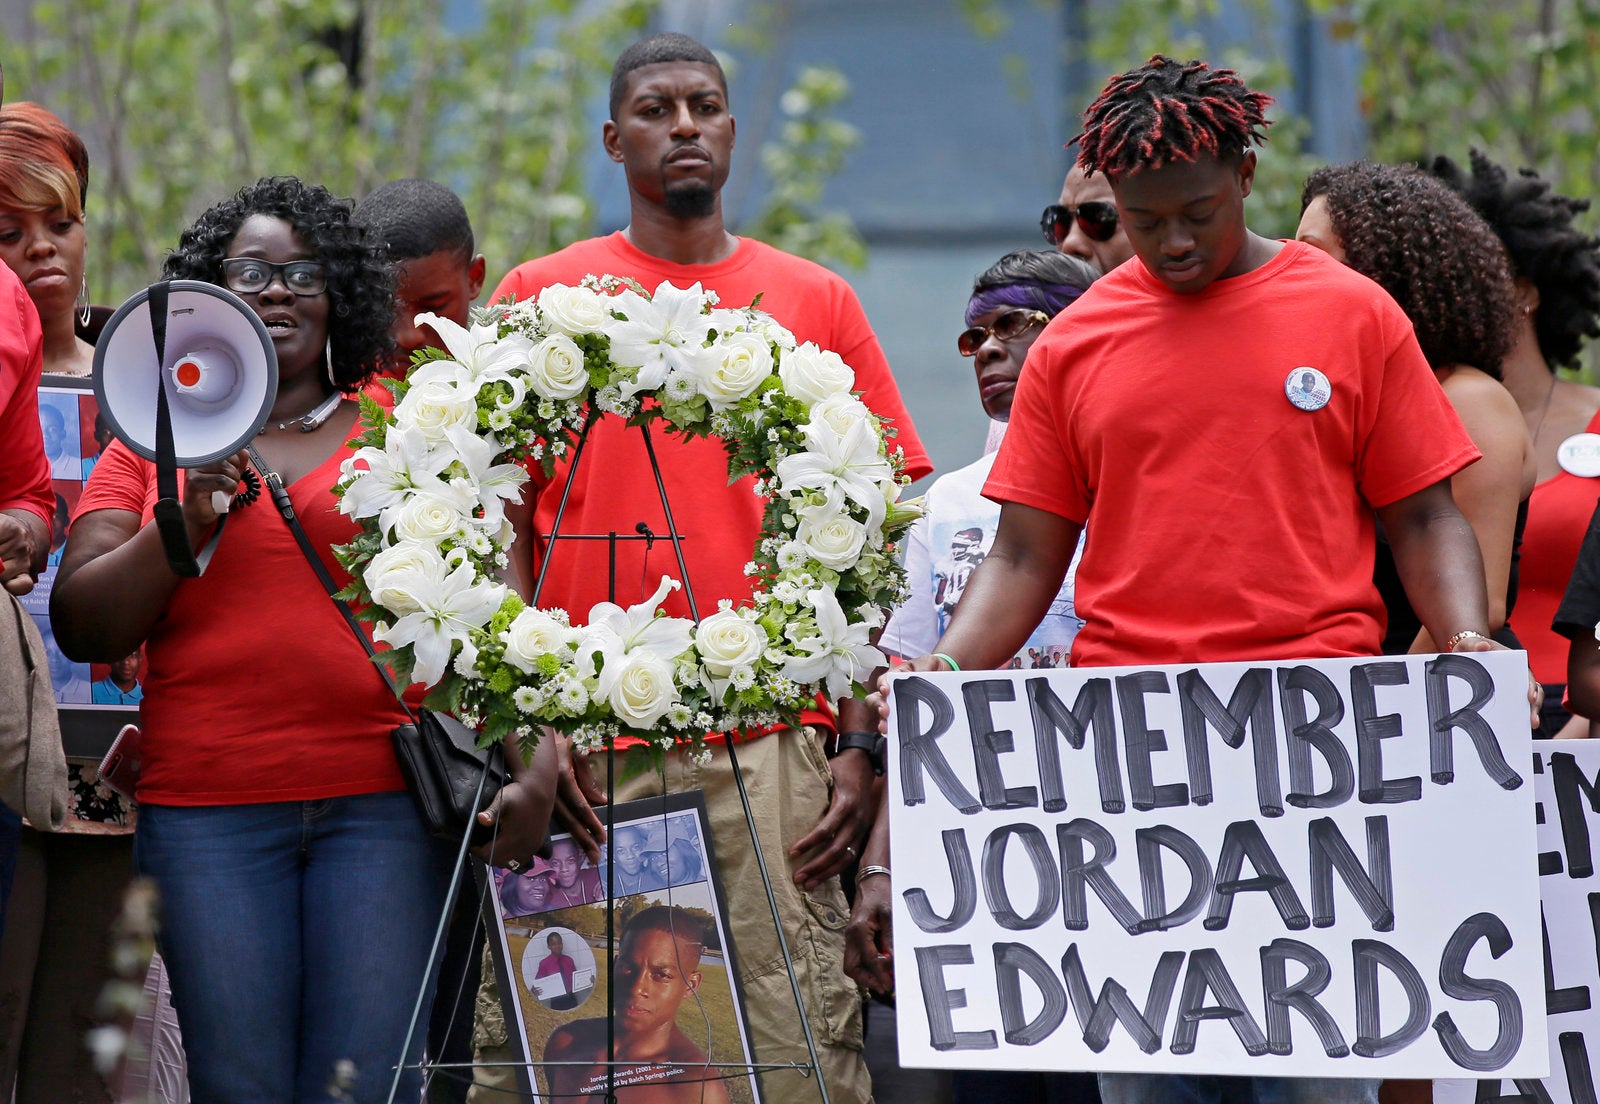 Slain teen Jordan Edwards' mother Charmaine Edwards, left, speaks to supporters with son Vidal Allen, right, and husband Odell Edwards during a protest outside the courthouse in Dallas